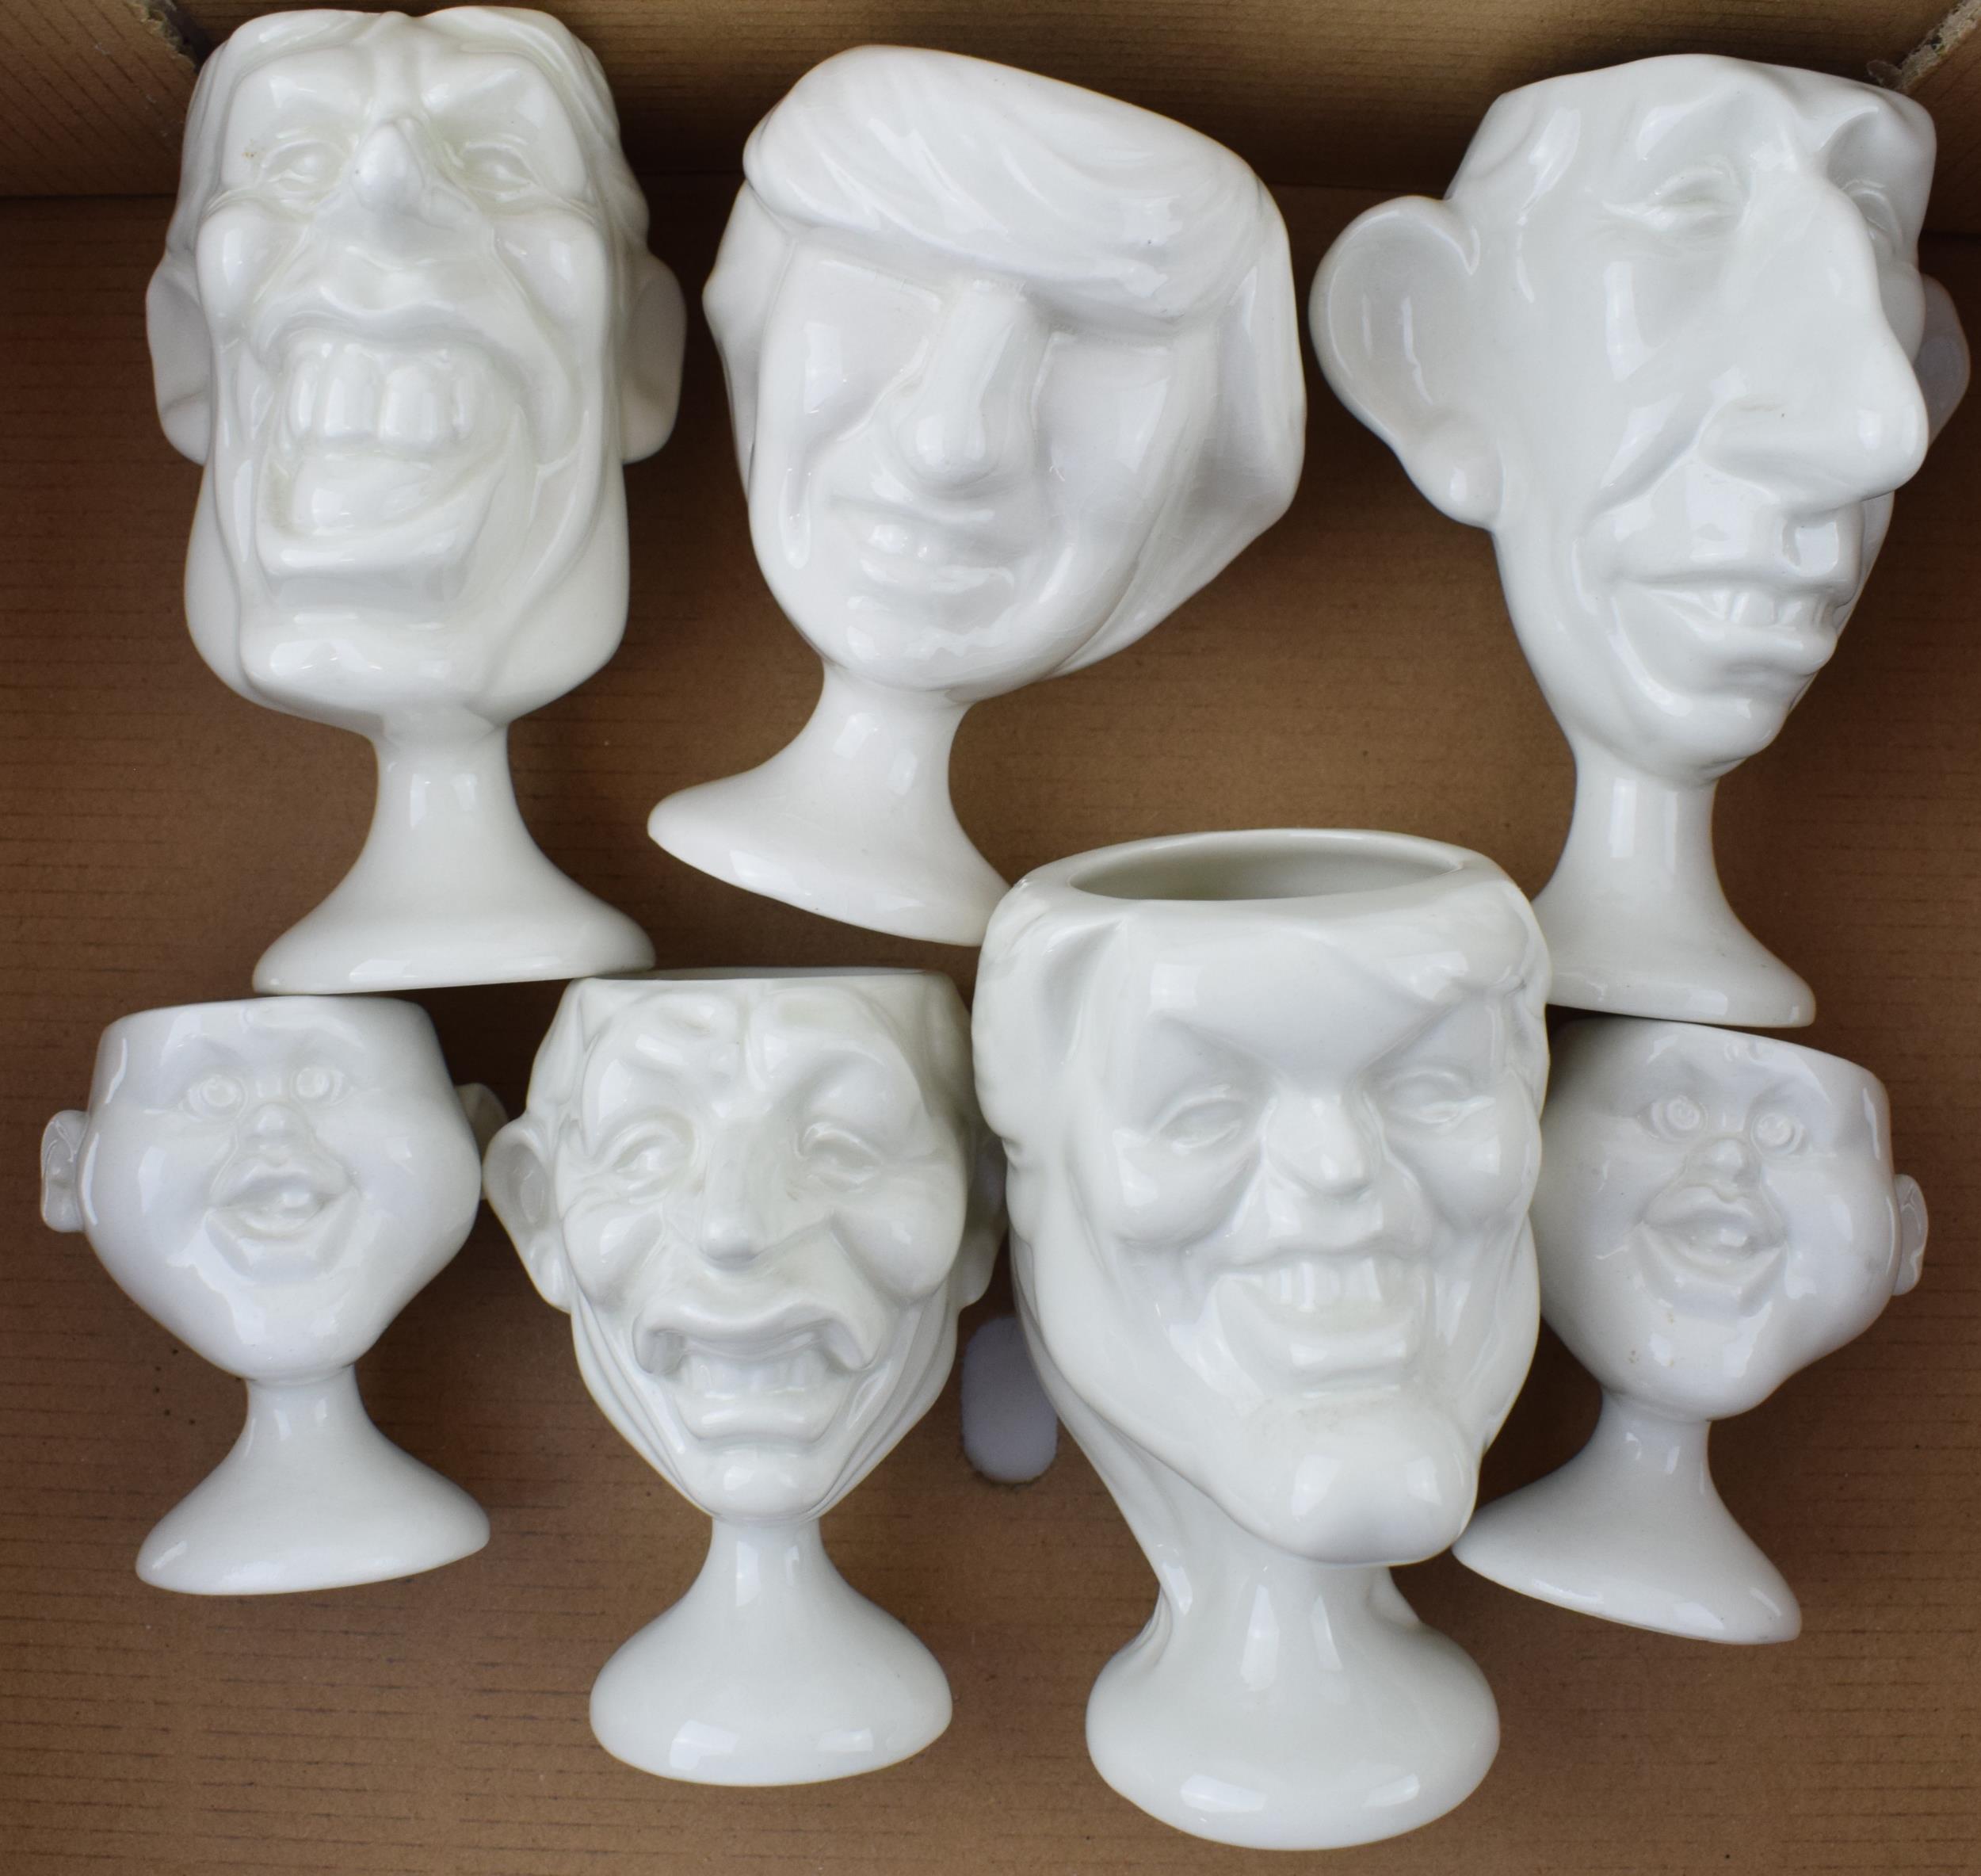 A collection of Fluck and Law Spitting Image egg cups to include Charles, Diana, William as a